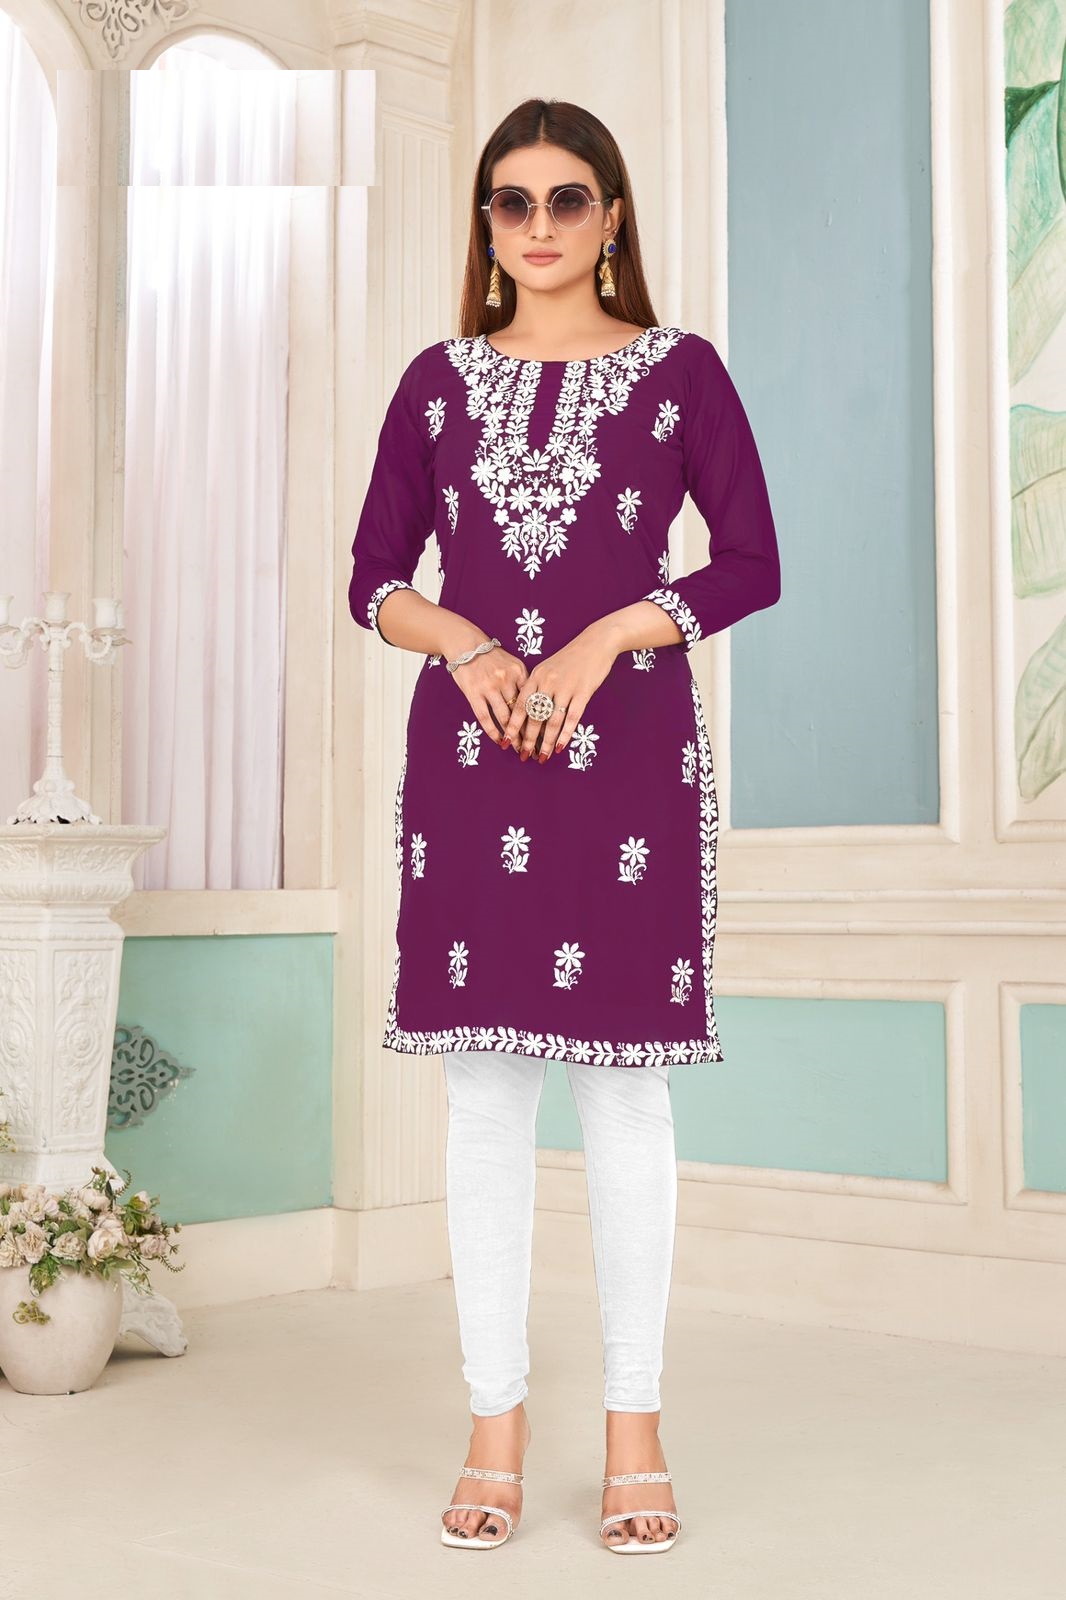 Heavy Bombay rayon white cotton embroidery work kurti for online sale